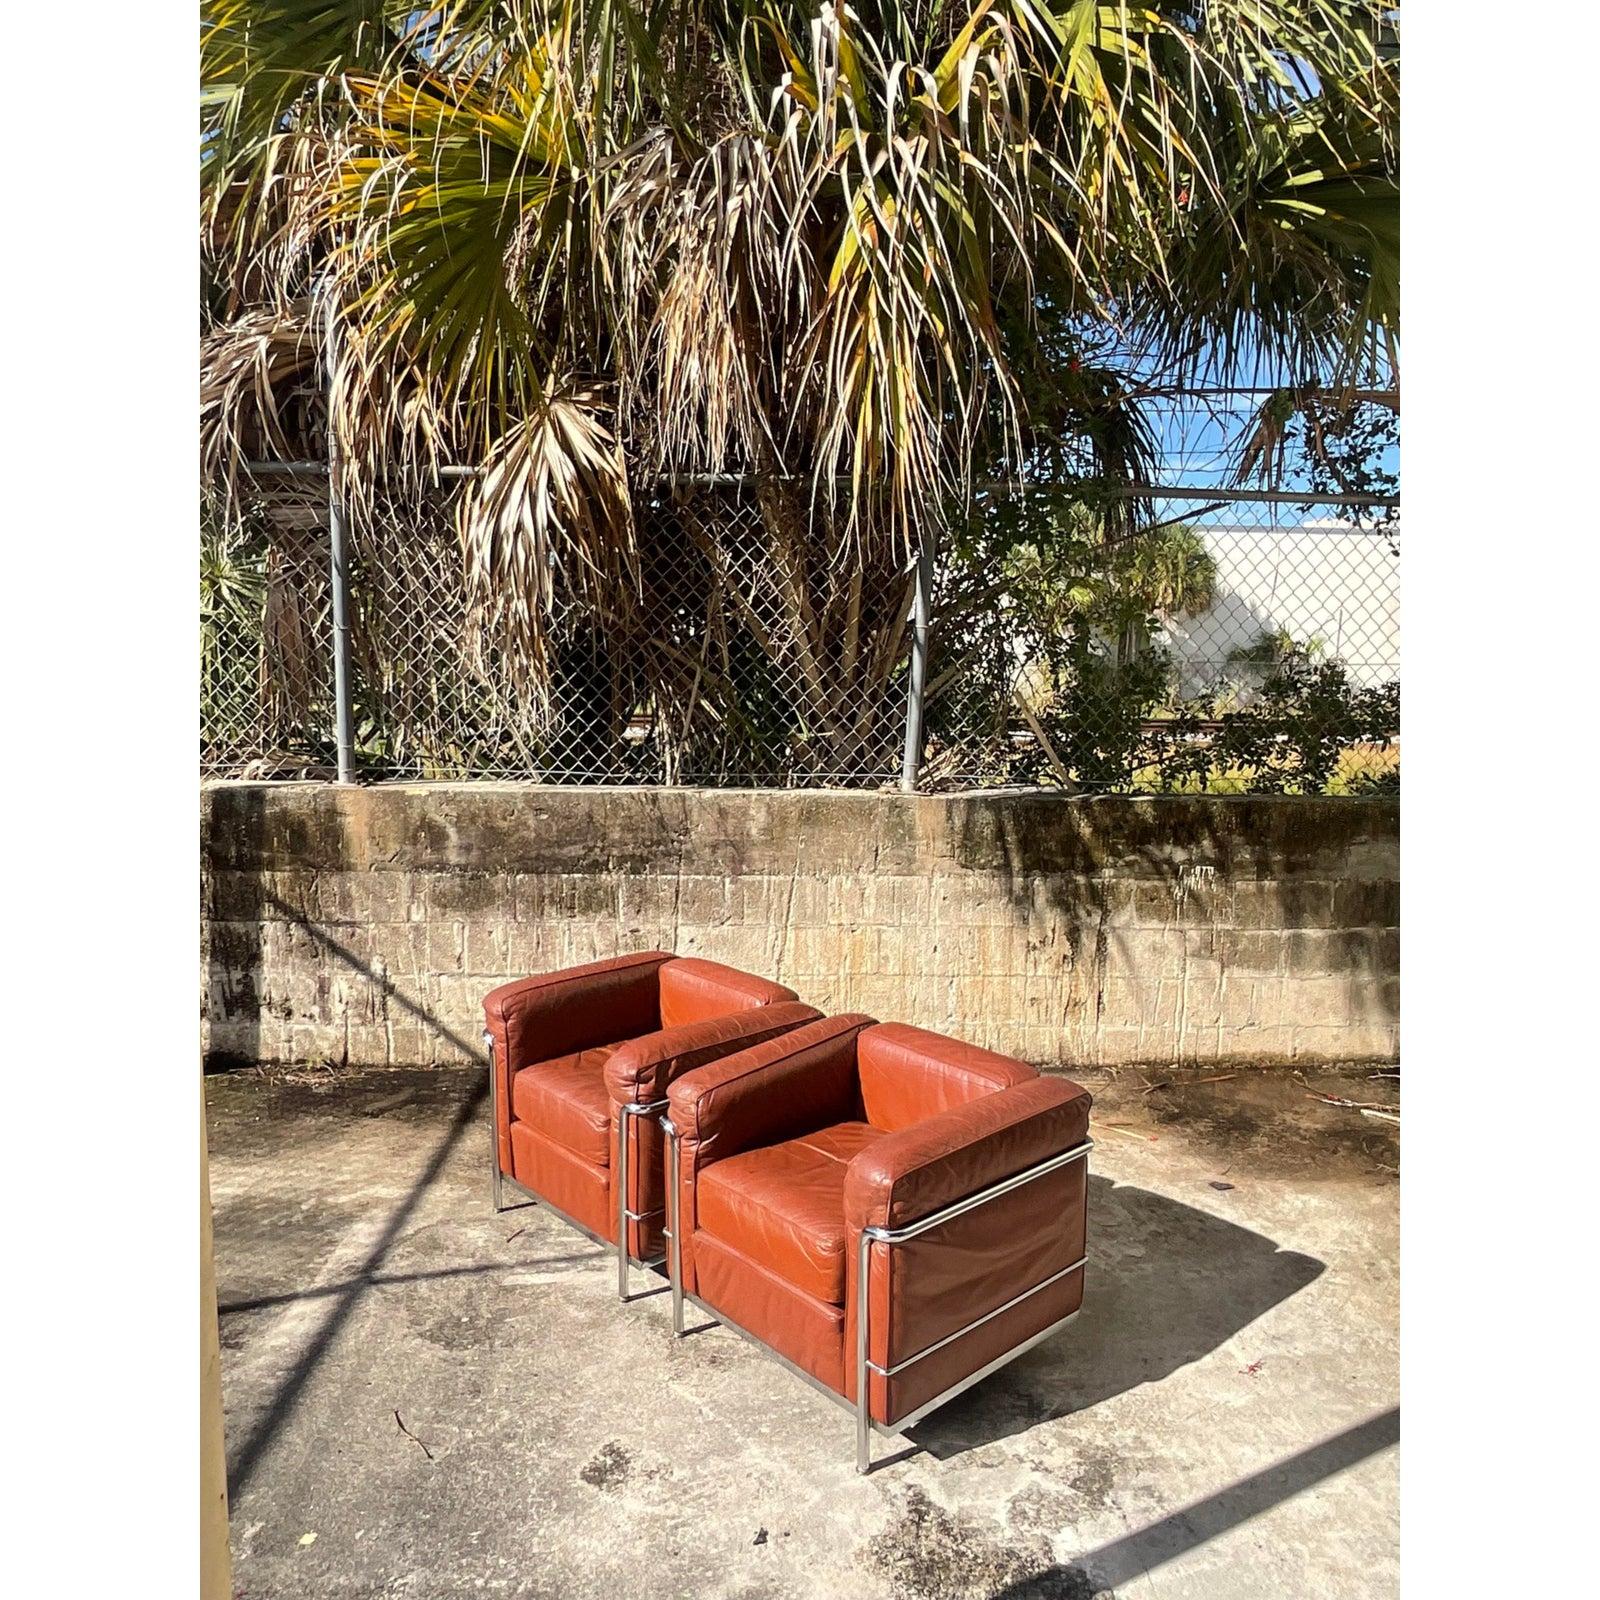 Fantastic vintage pair of Midcentury arm chairs. Done in the manner of the LC2 arm chair for Corbusier. Beautiful warm caramel colored leather with the most perfect distressed finish. Iconic chrome frame. Acquired from a Palm Beach estate.